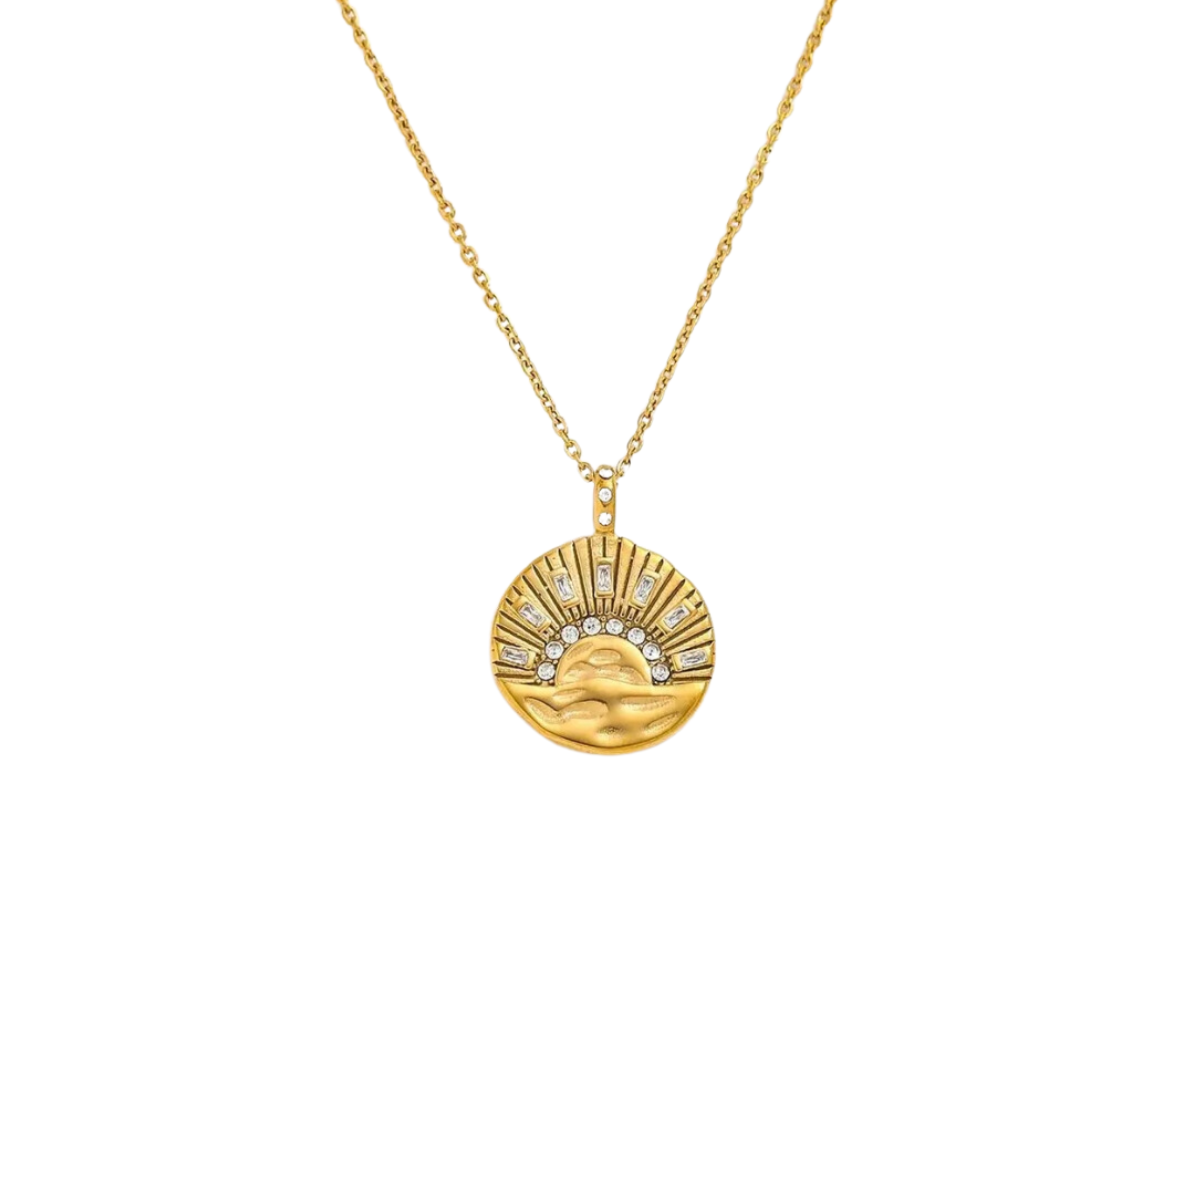 The Voyage 18k Gold Plated Necklace